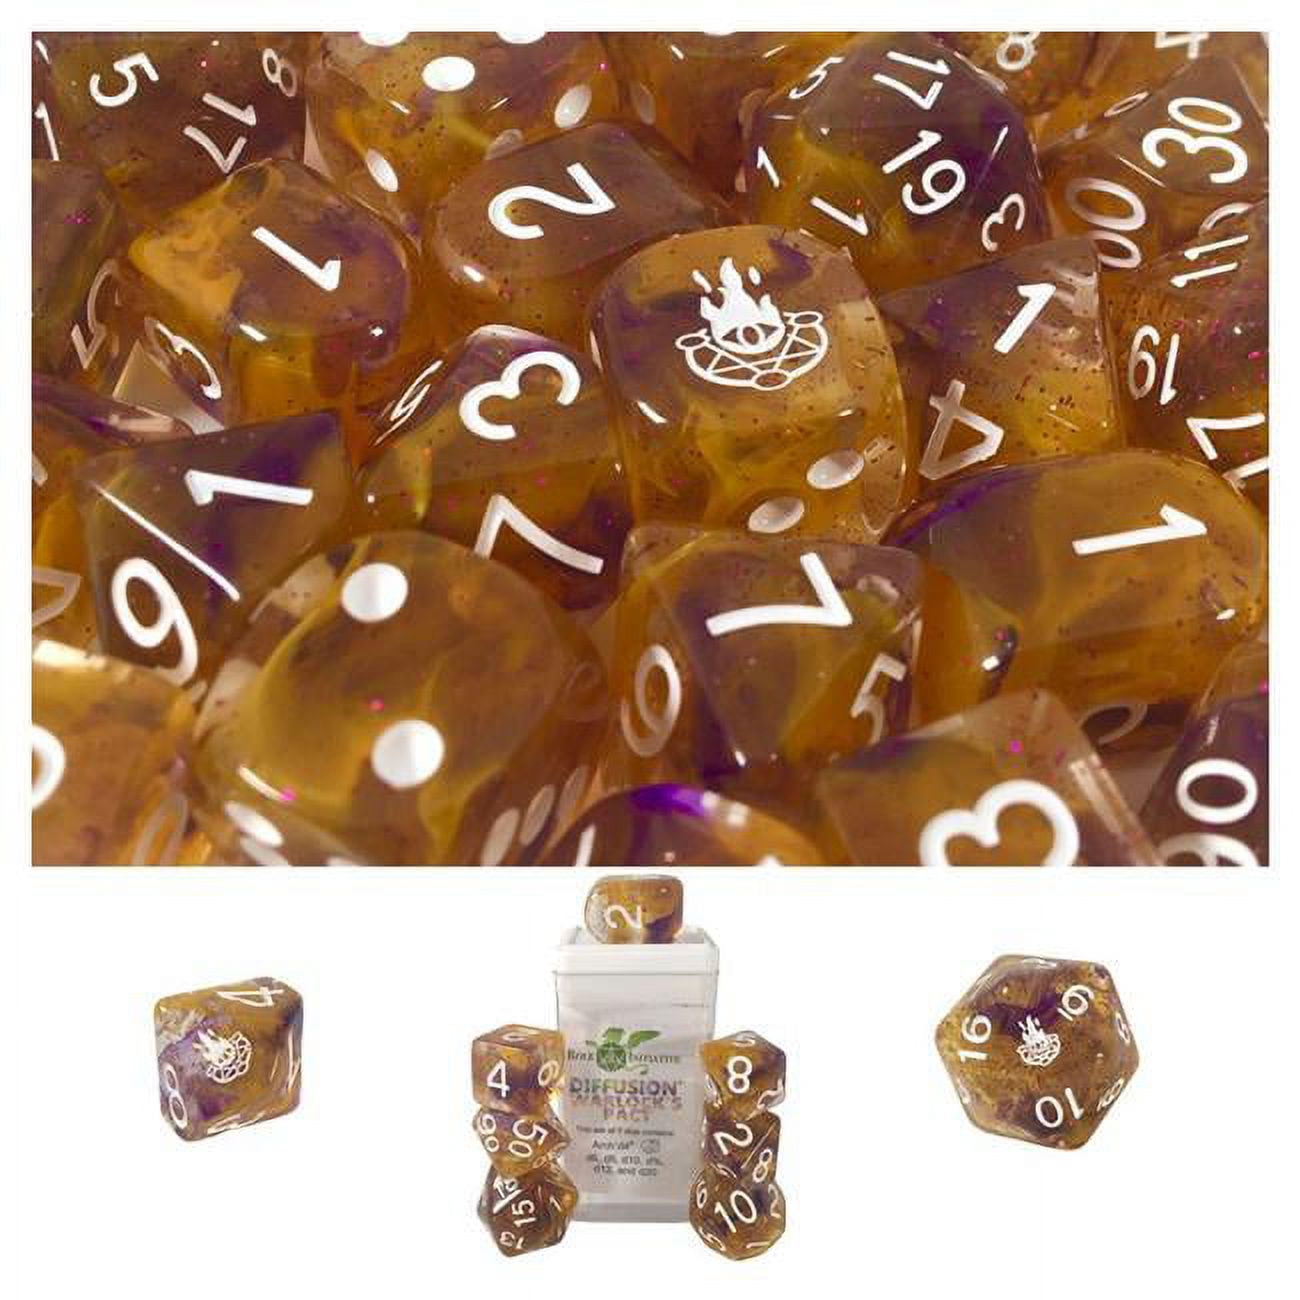 Picture of Role 4 Initiative R4I50531-7C-S Diffusion Warlocks Pact Dice - Set of 7